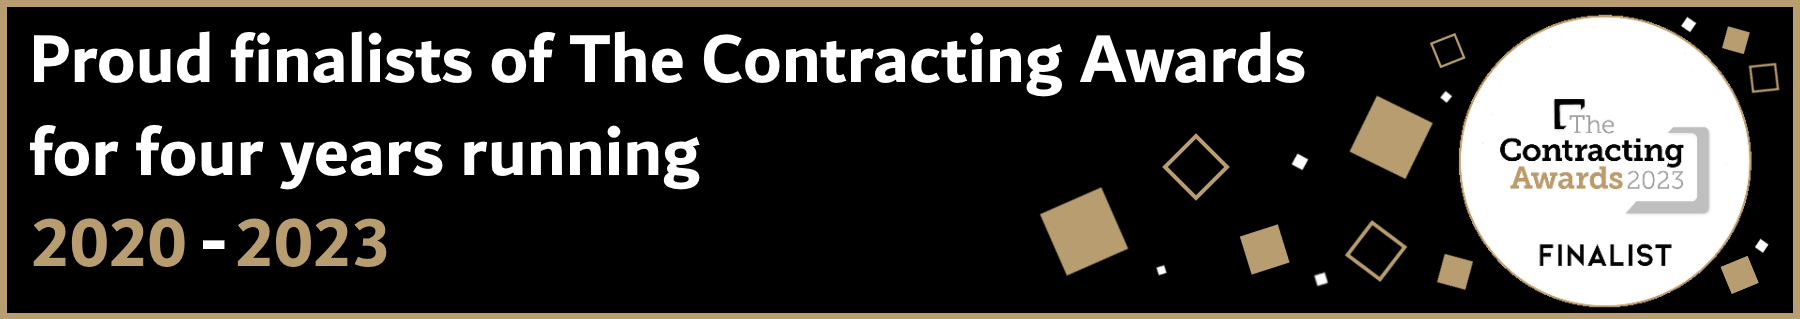 Contracting awards 2023